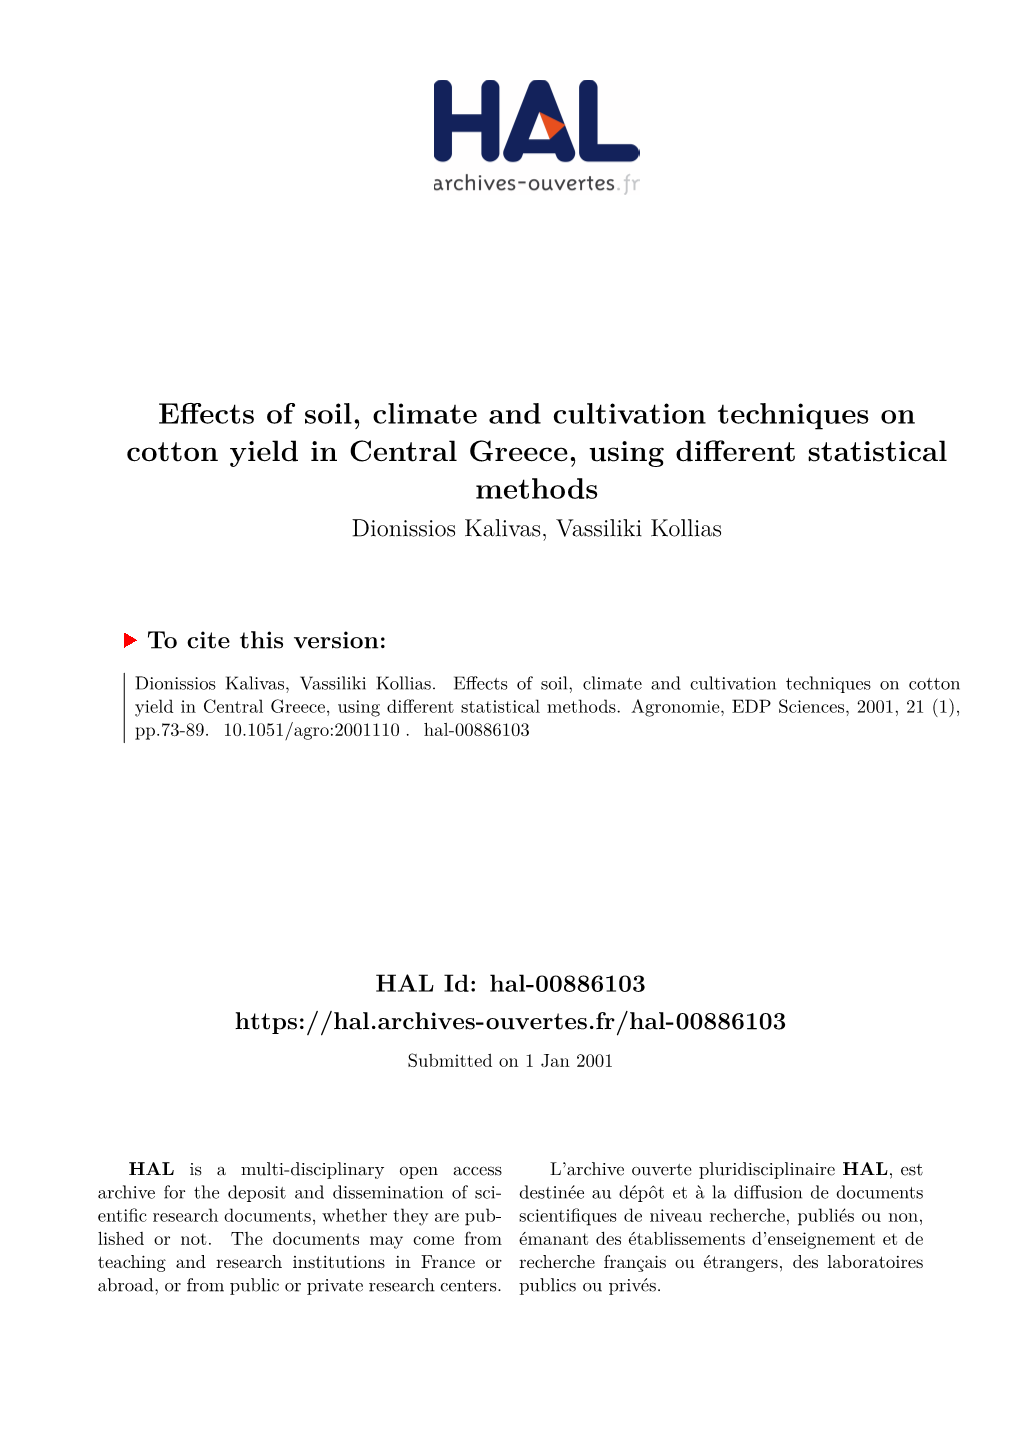 Effects of Soil, Climate and Cultivation Techniques on Cotton Yield in Central Greece, Using Different Statistical Methods Dionissios Kalivas, Vassiliki Kollias